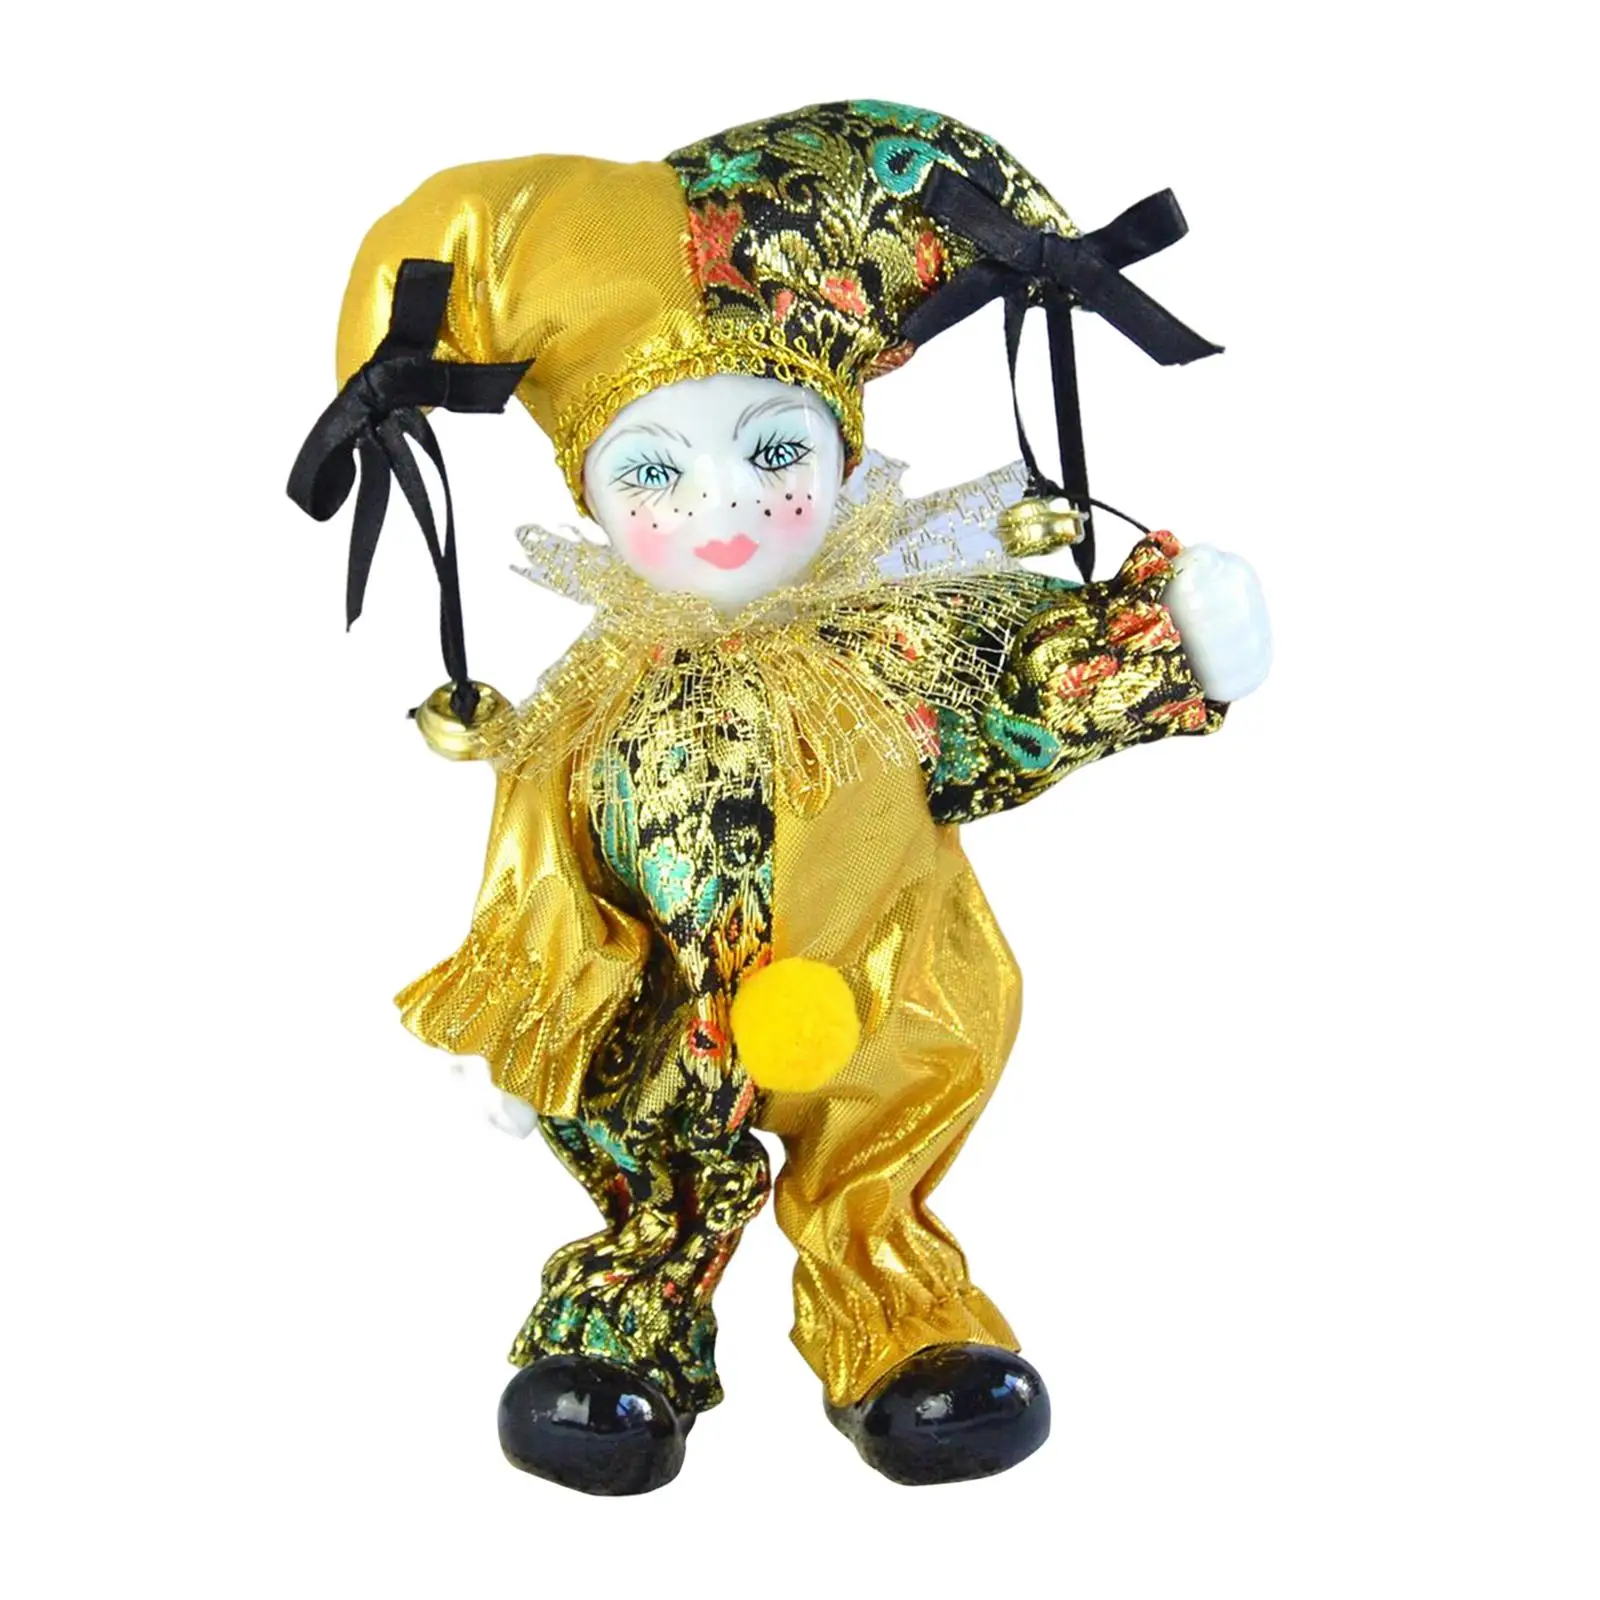 Triangel Doll Small Clown Doll Porcelain Doll Figurine Crafts for Game Prop